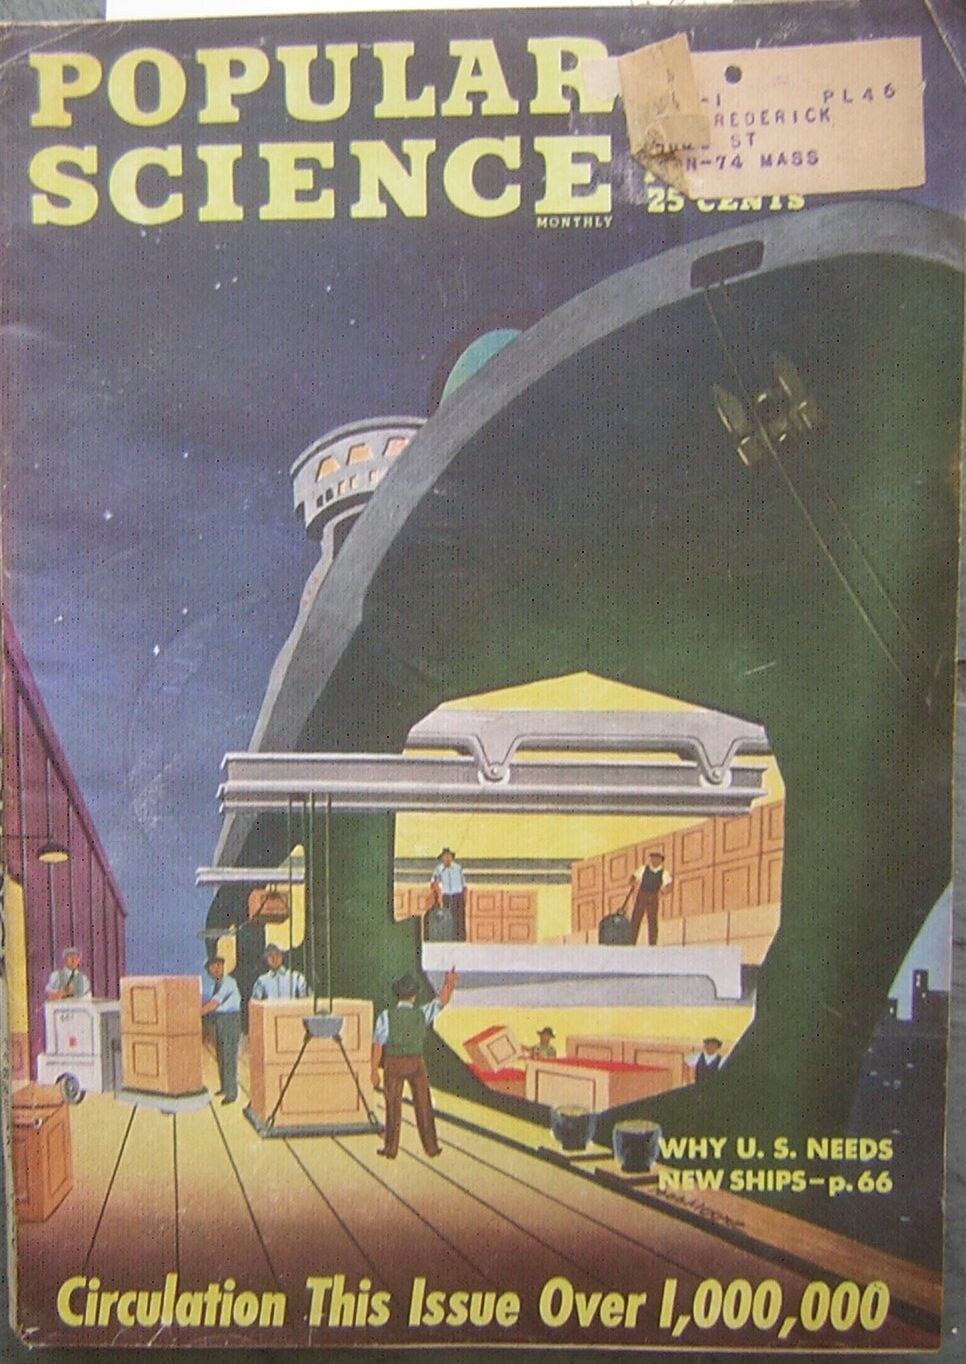 February, 1946 Popular Science - Why U.S. Needs New Ships - Artwork of War